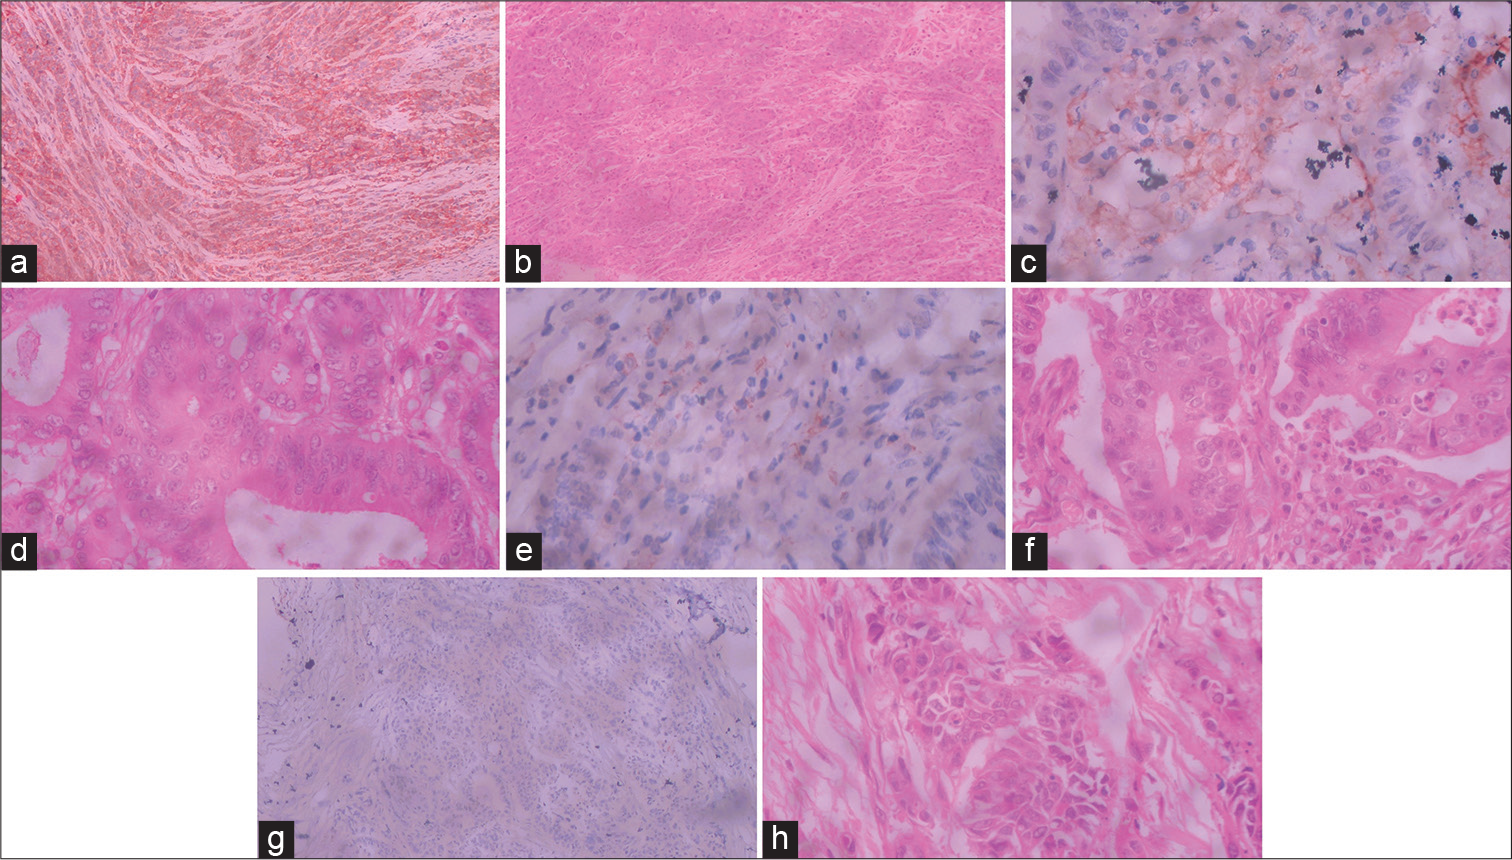 Immunohistochemical expression of programmed death ligand (PD-L1) is associated with poor differentiation, higher tumor-infiltrating lymphocytes, and higher t and n stage in colorectal adenocarcinoma: A single-center analytical study of 52 cases in South India